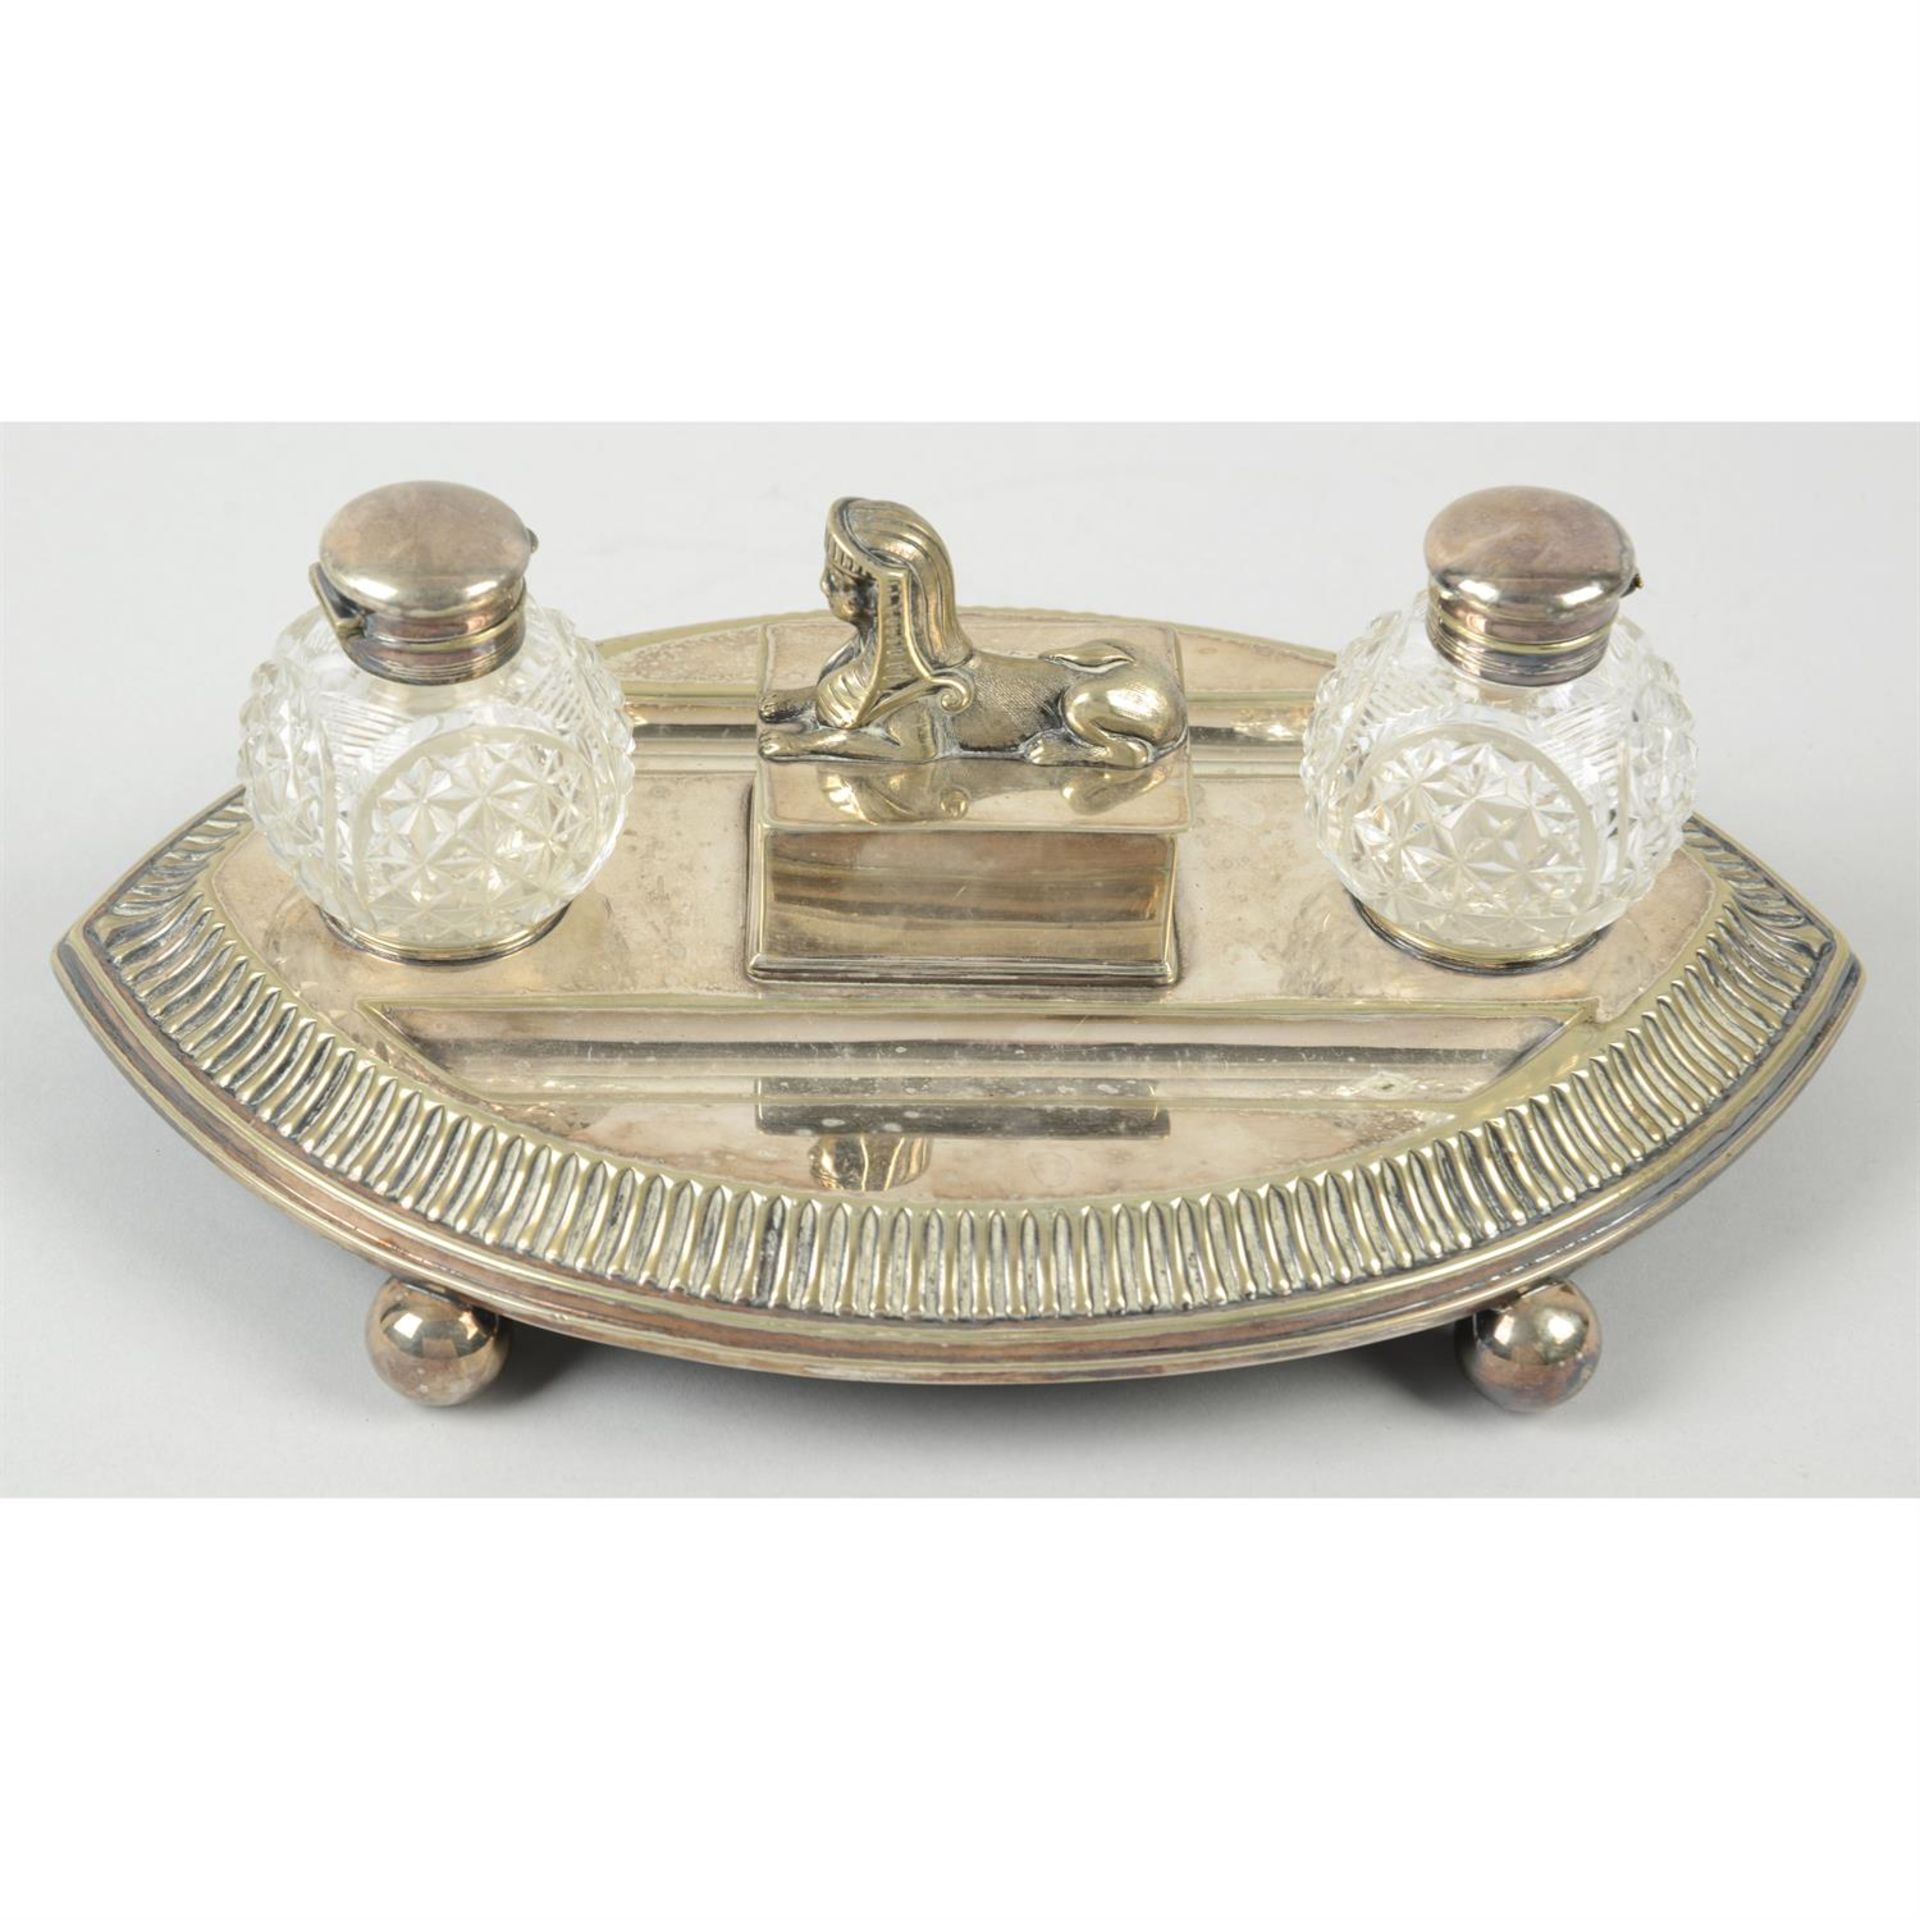 A travelling vanity/work case with plated mounts; together with a plated inkstand. (2). - Image 2 of 2